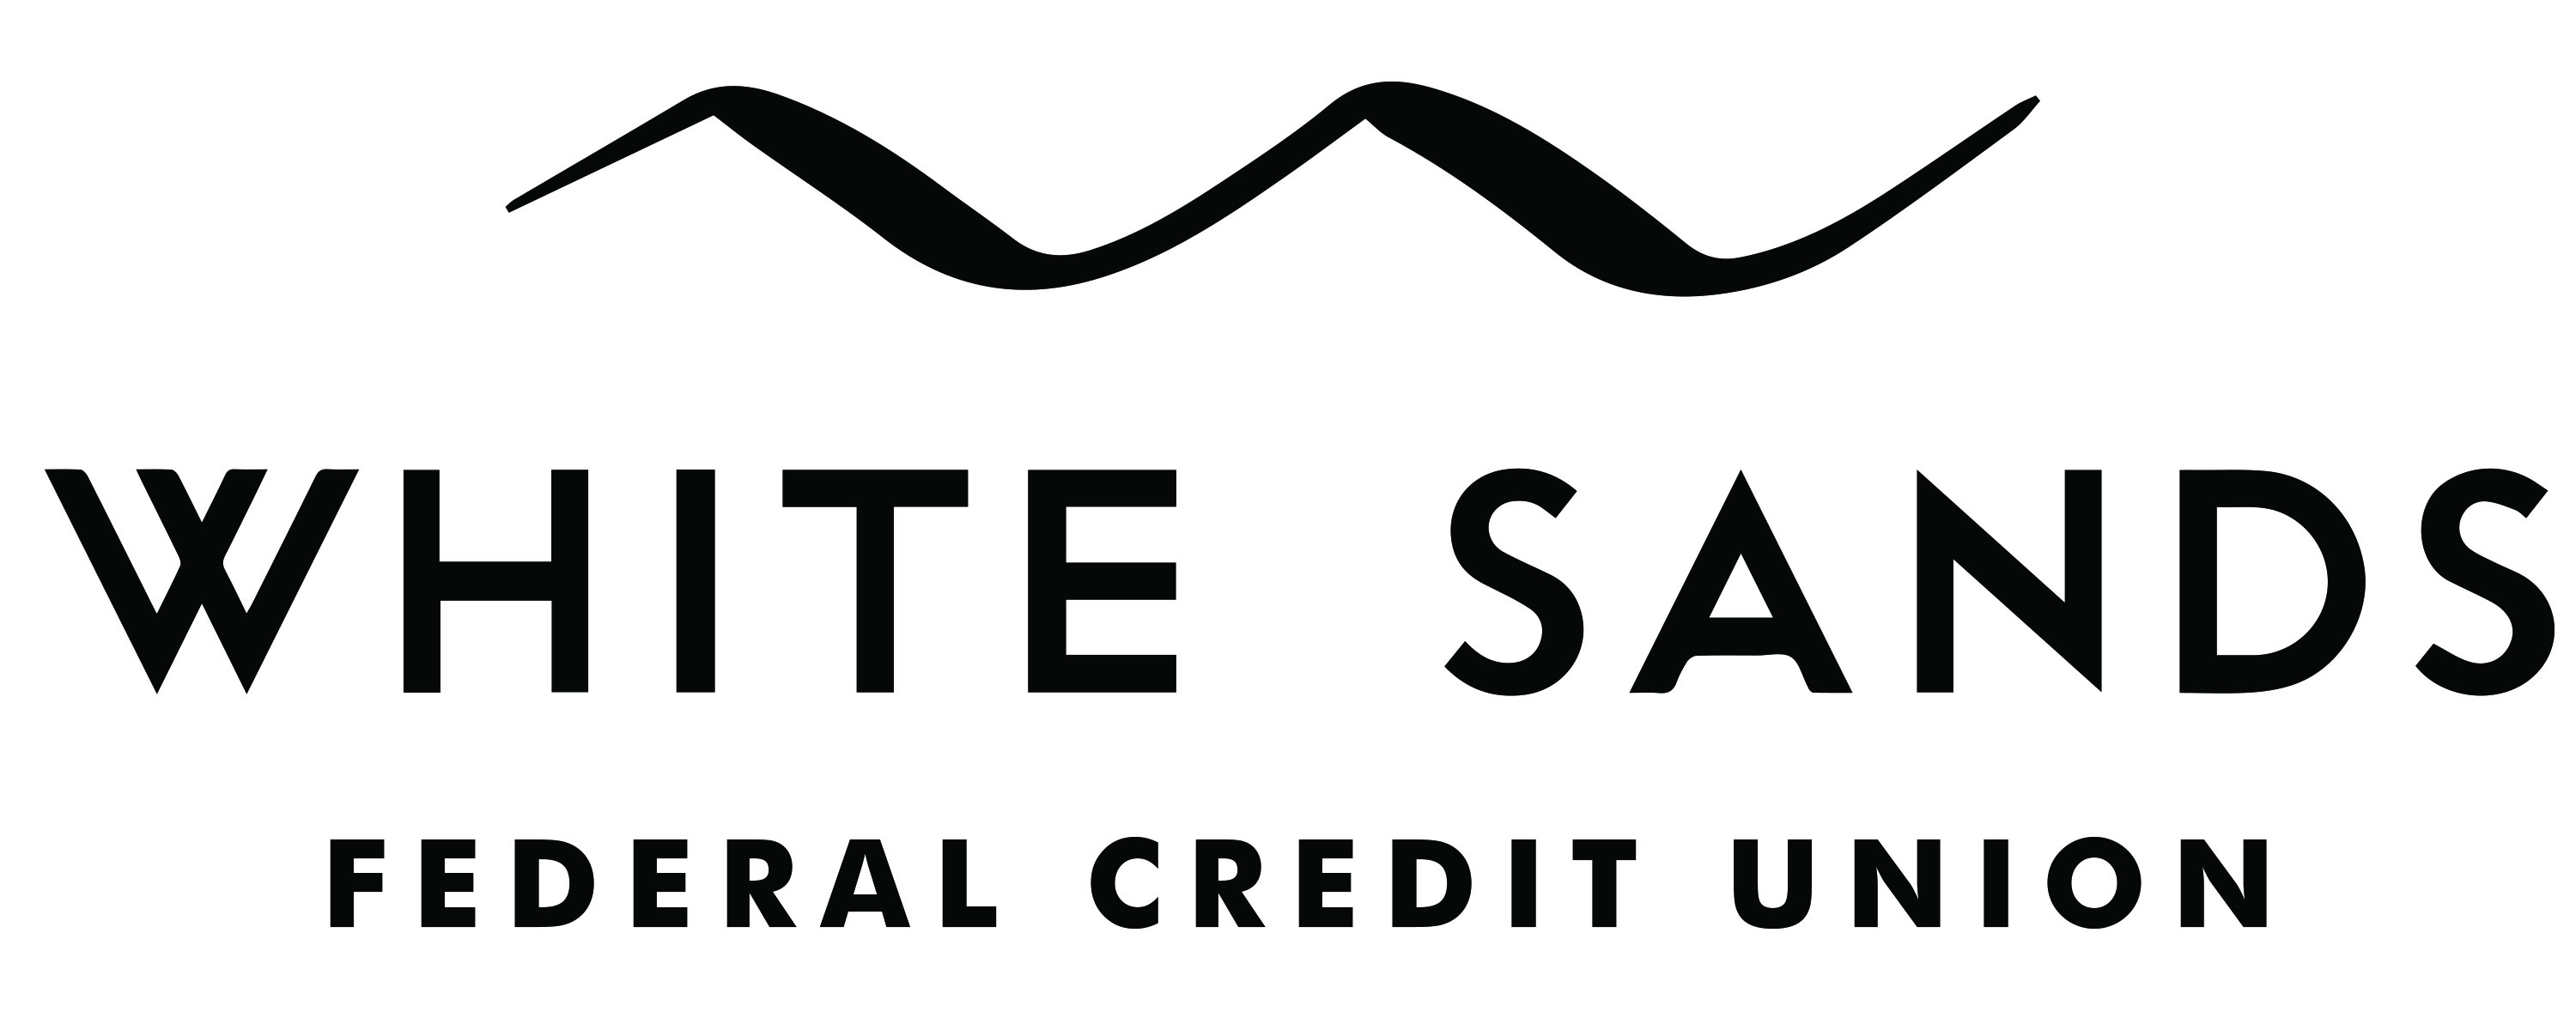 White Sands Federal Credit Union (Photo Booth)